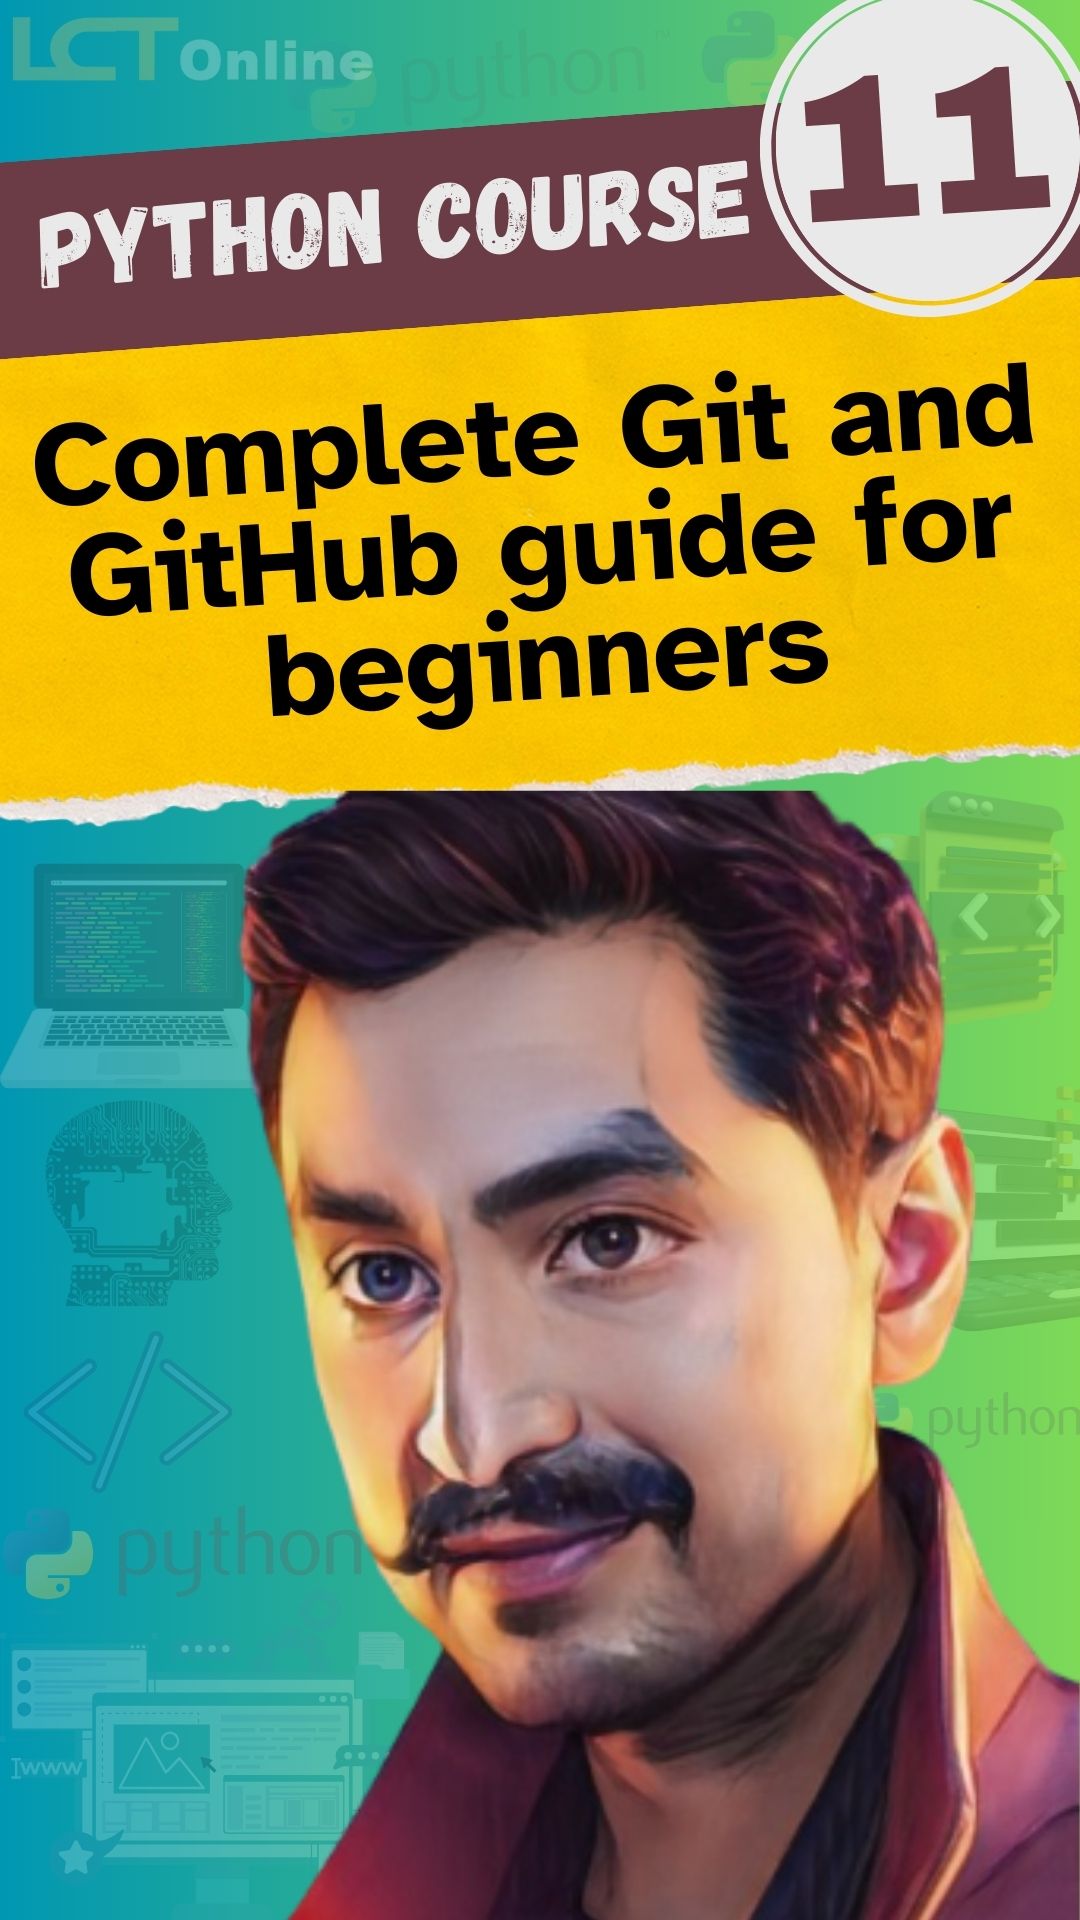 Complete Git and GitHub guide for beginners